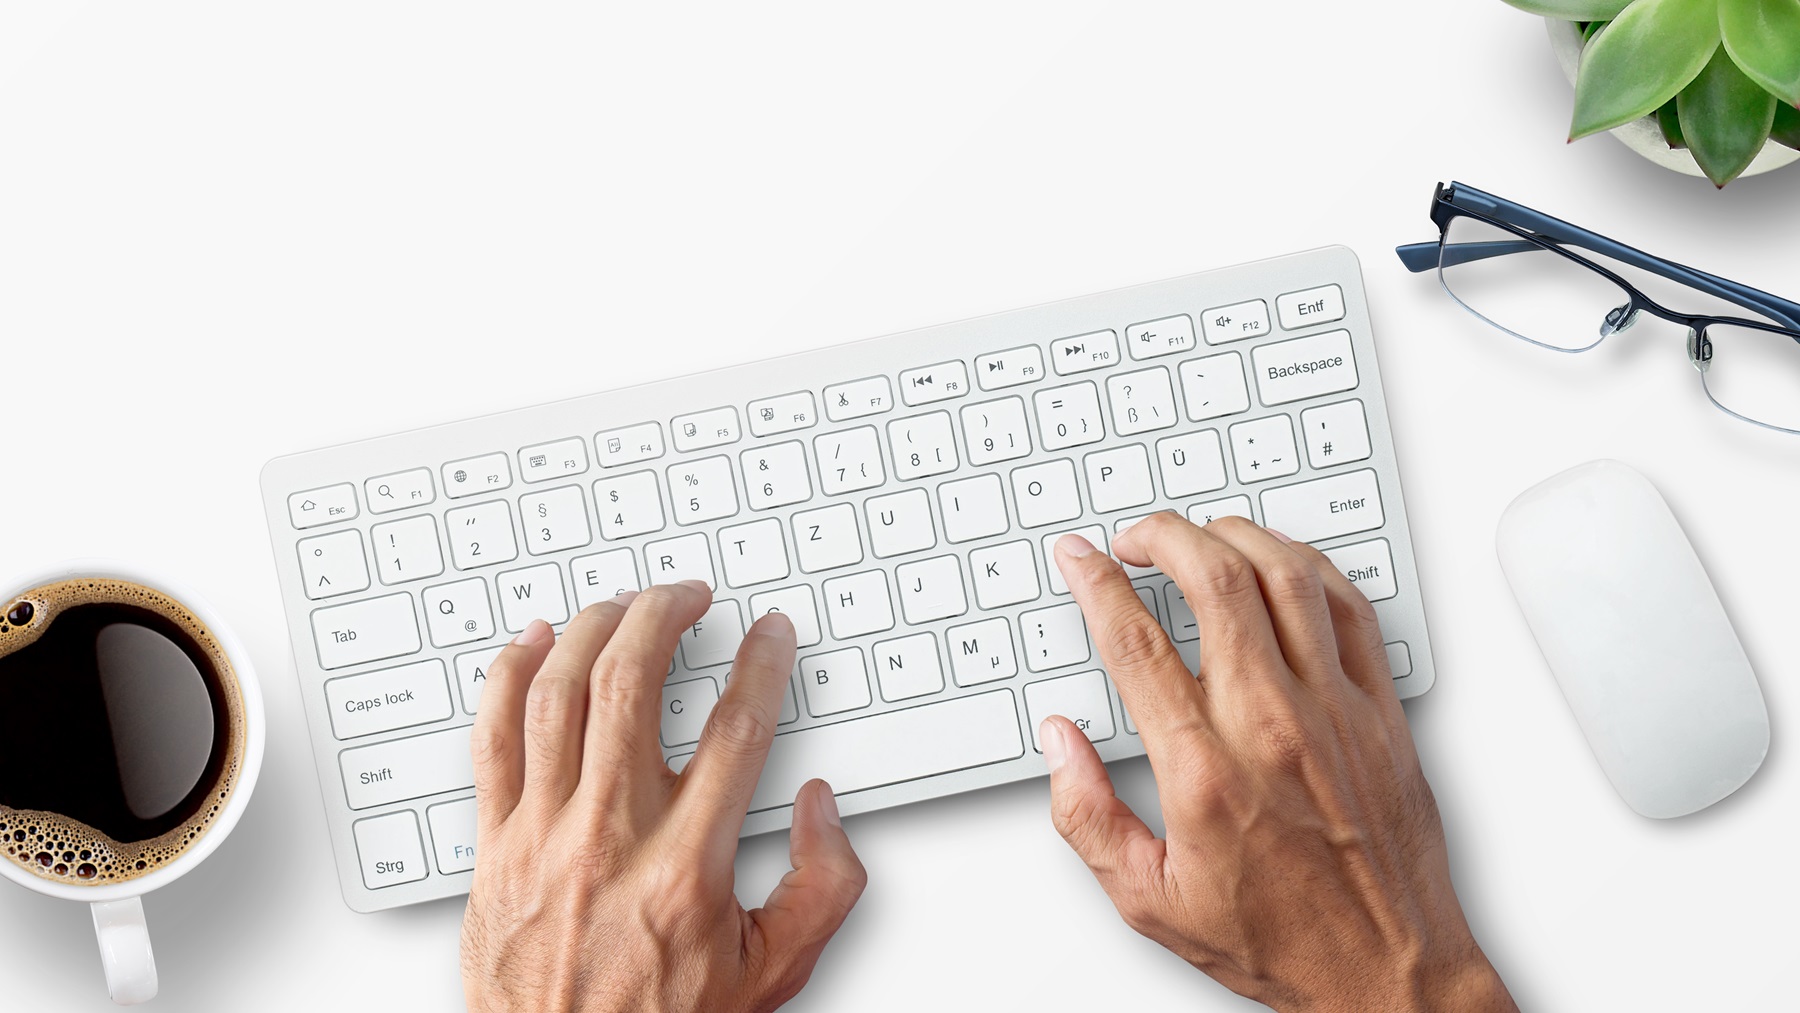 Hands,Typing,On,Computer,Keyboard,Over,White,Office,Desk,Table